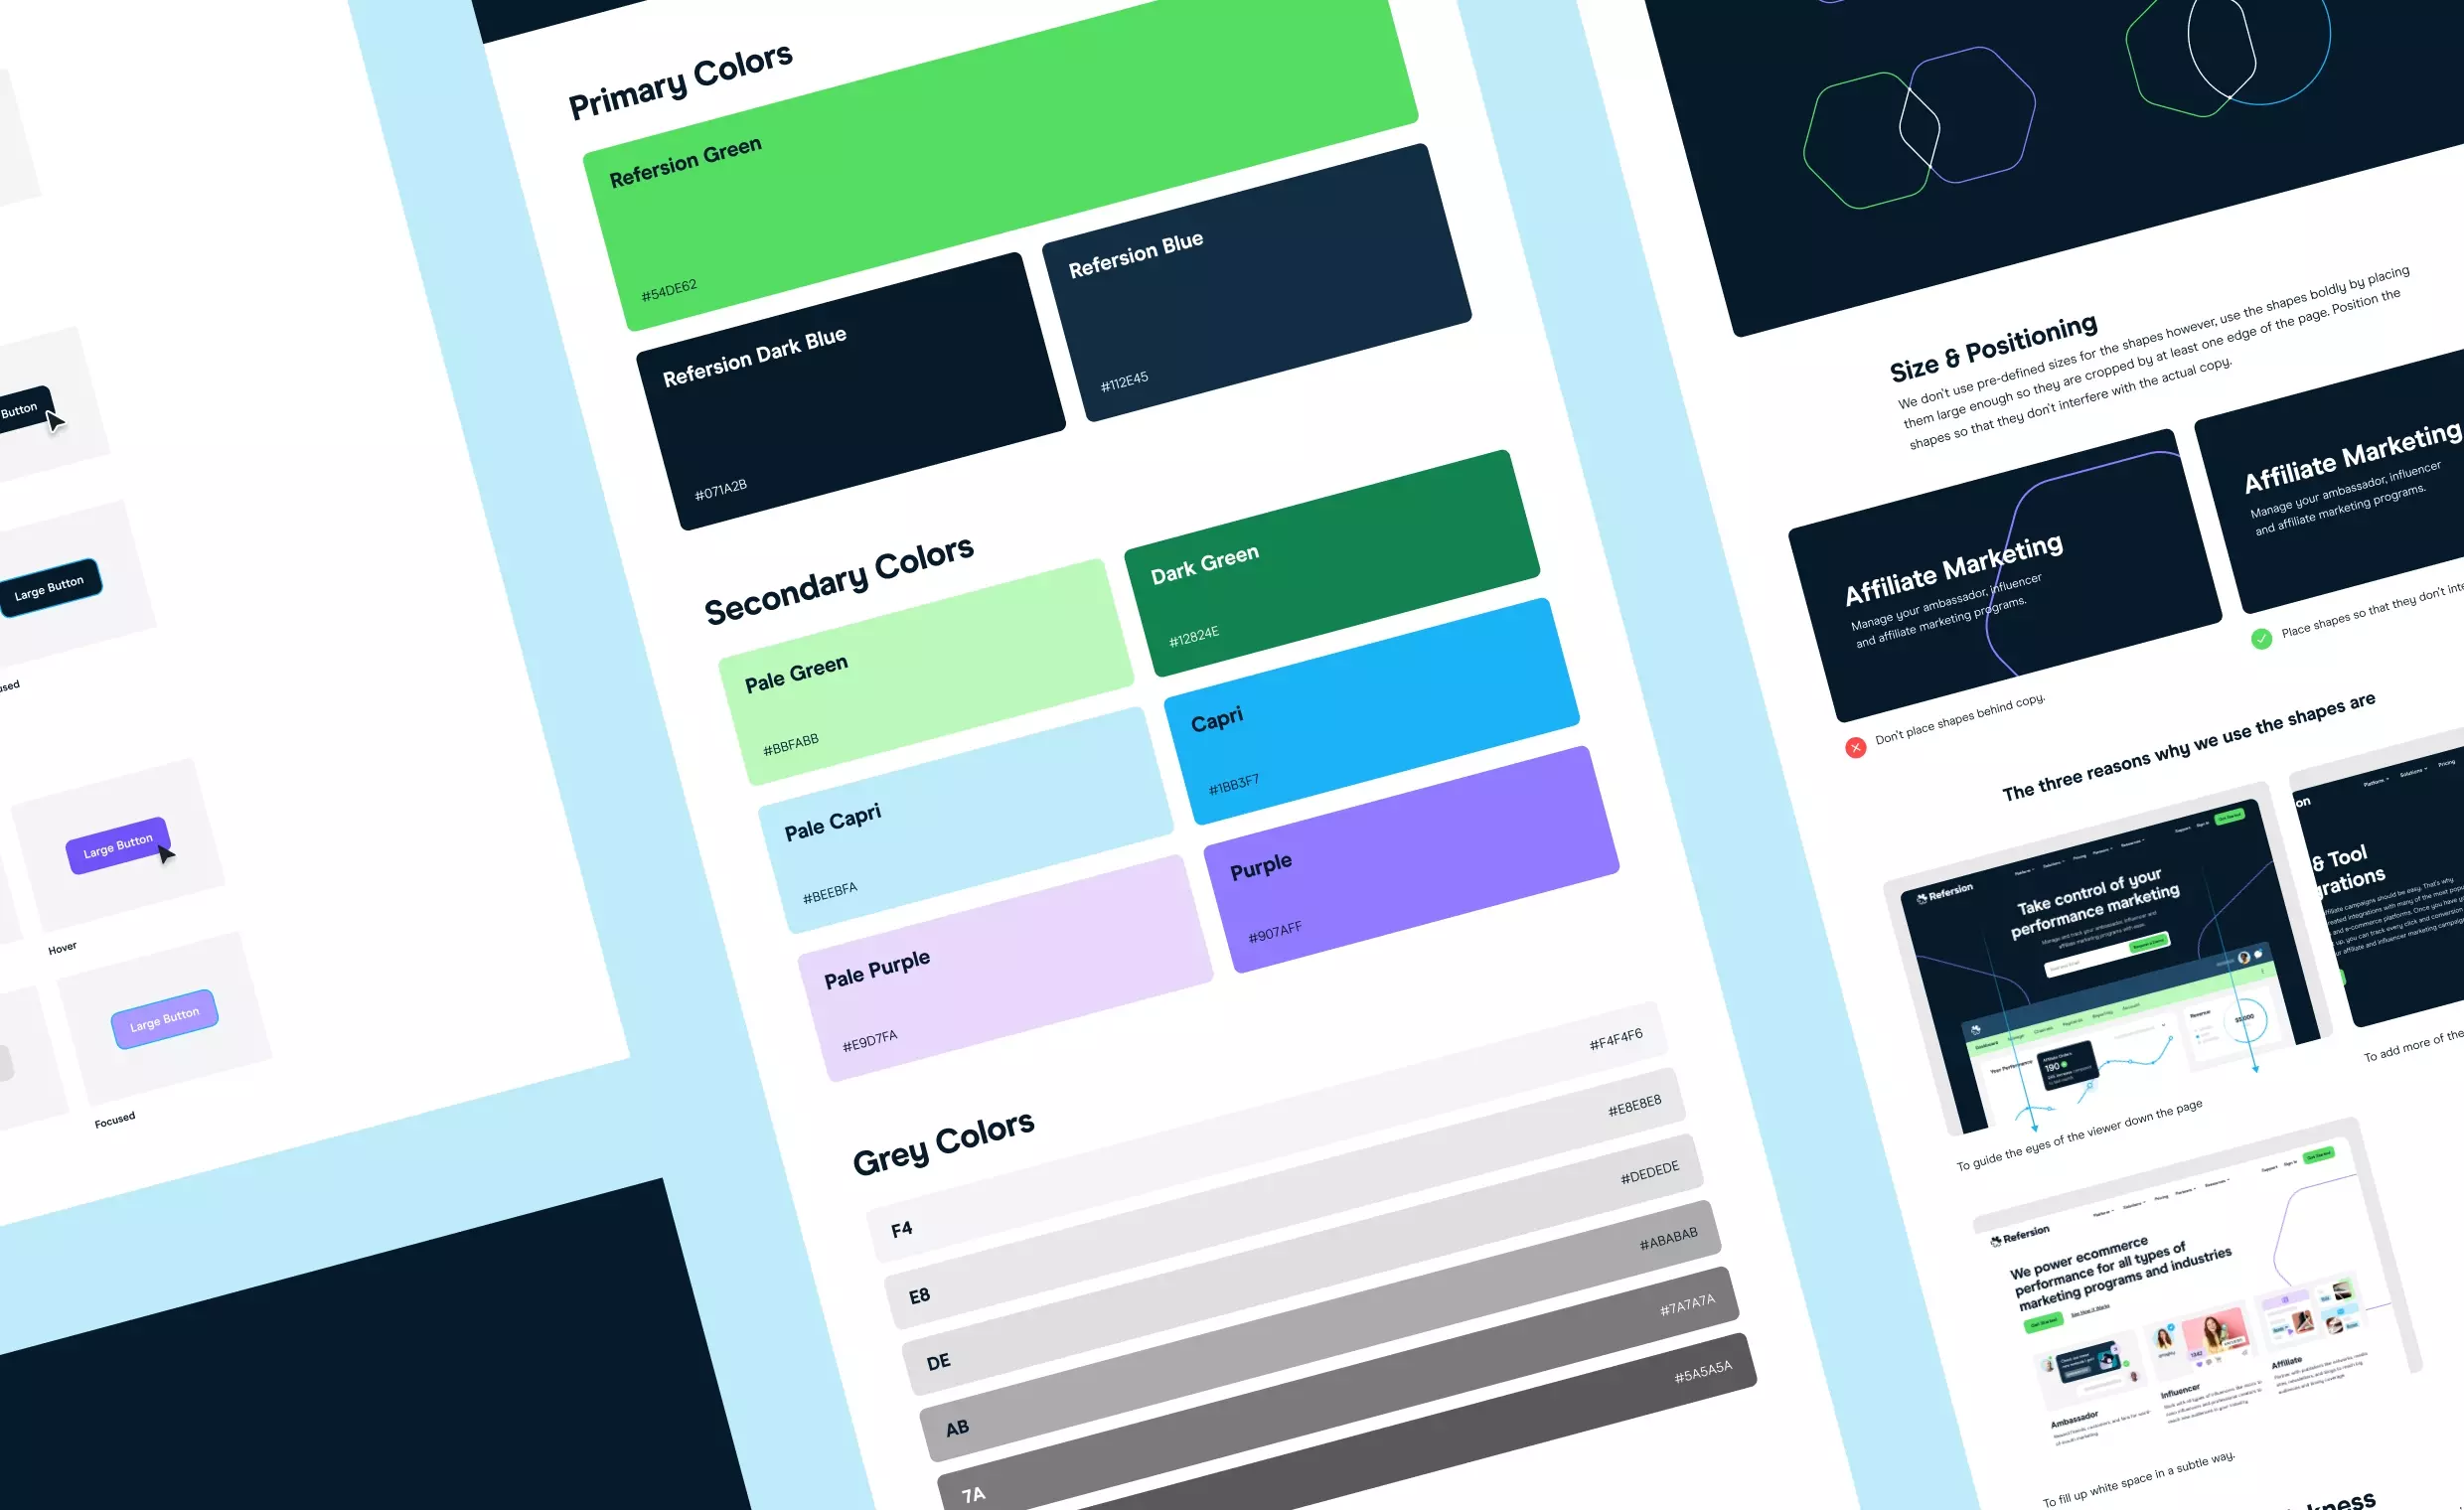 Refersion color palette and other design elements